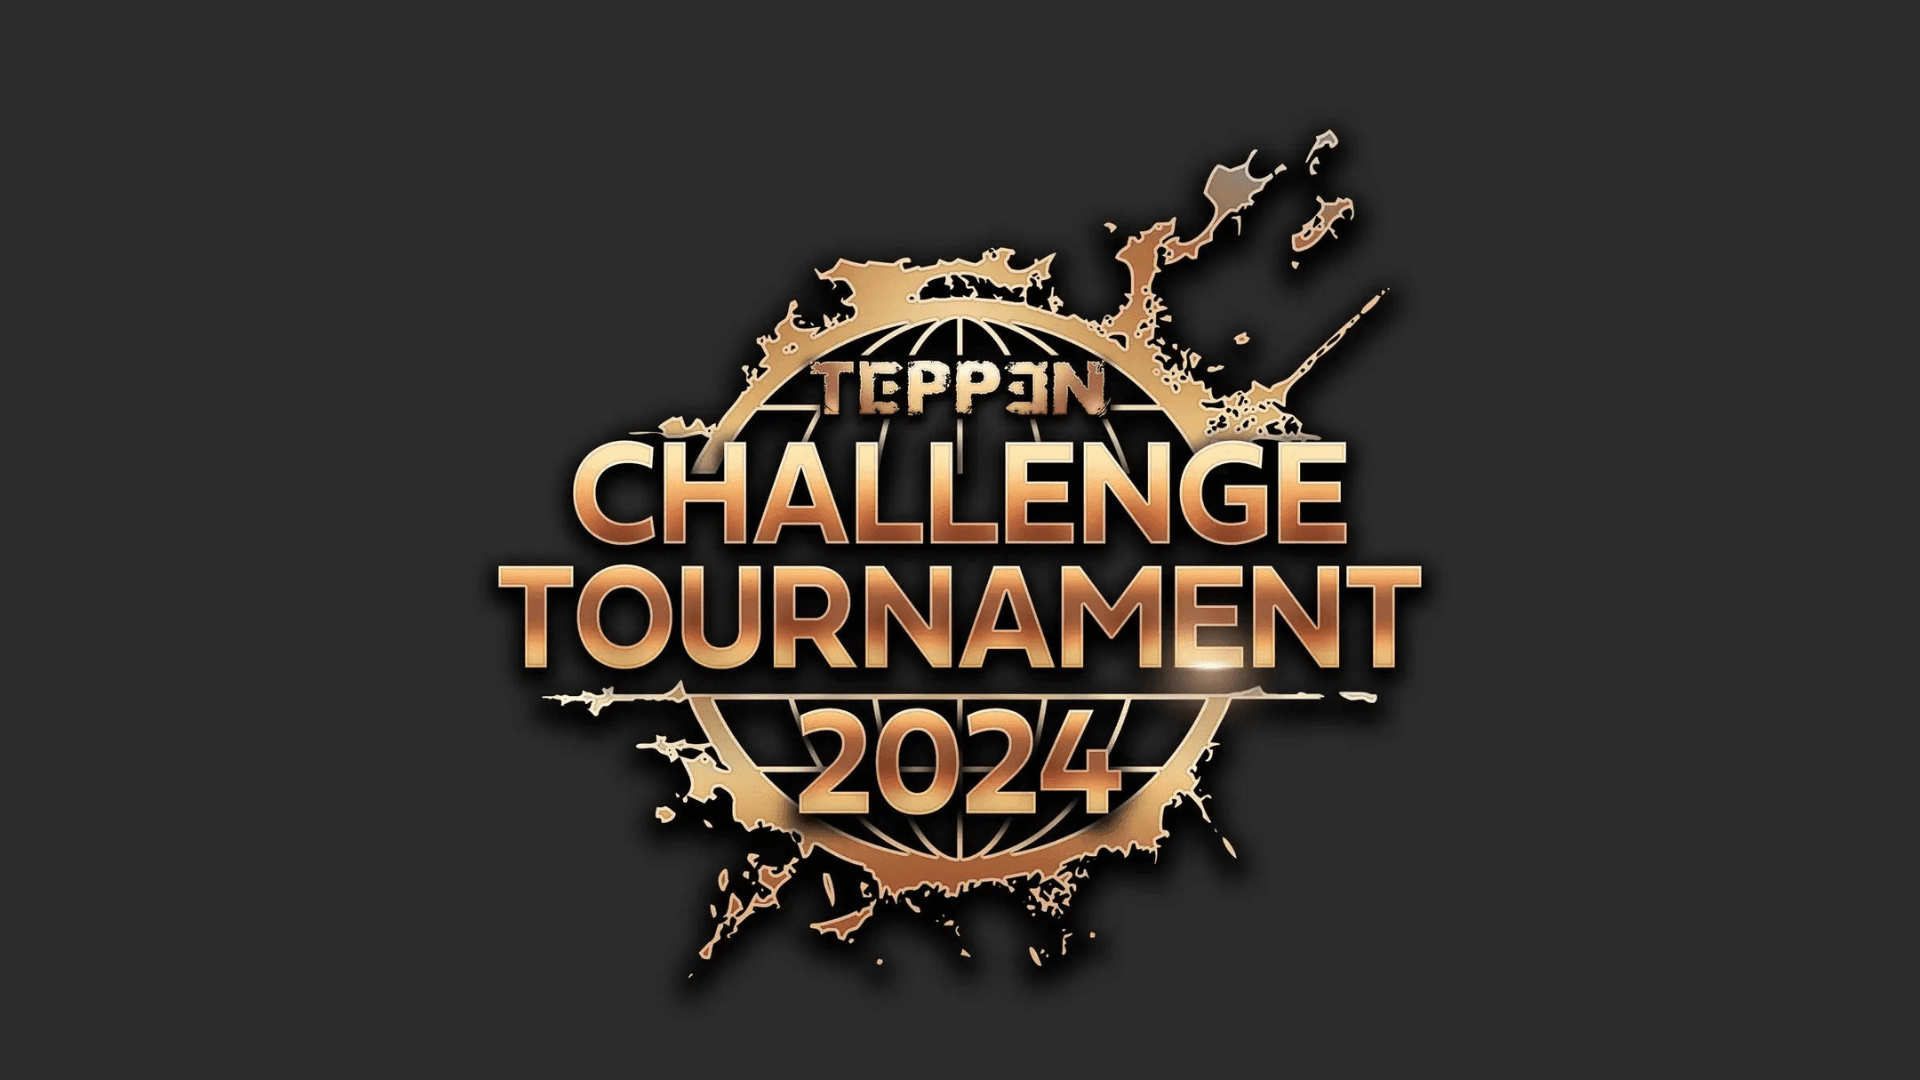 TEPPEN CHALLENGE TOURNAMENT 2024 [2nd] feature image